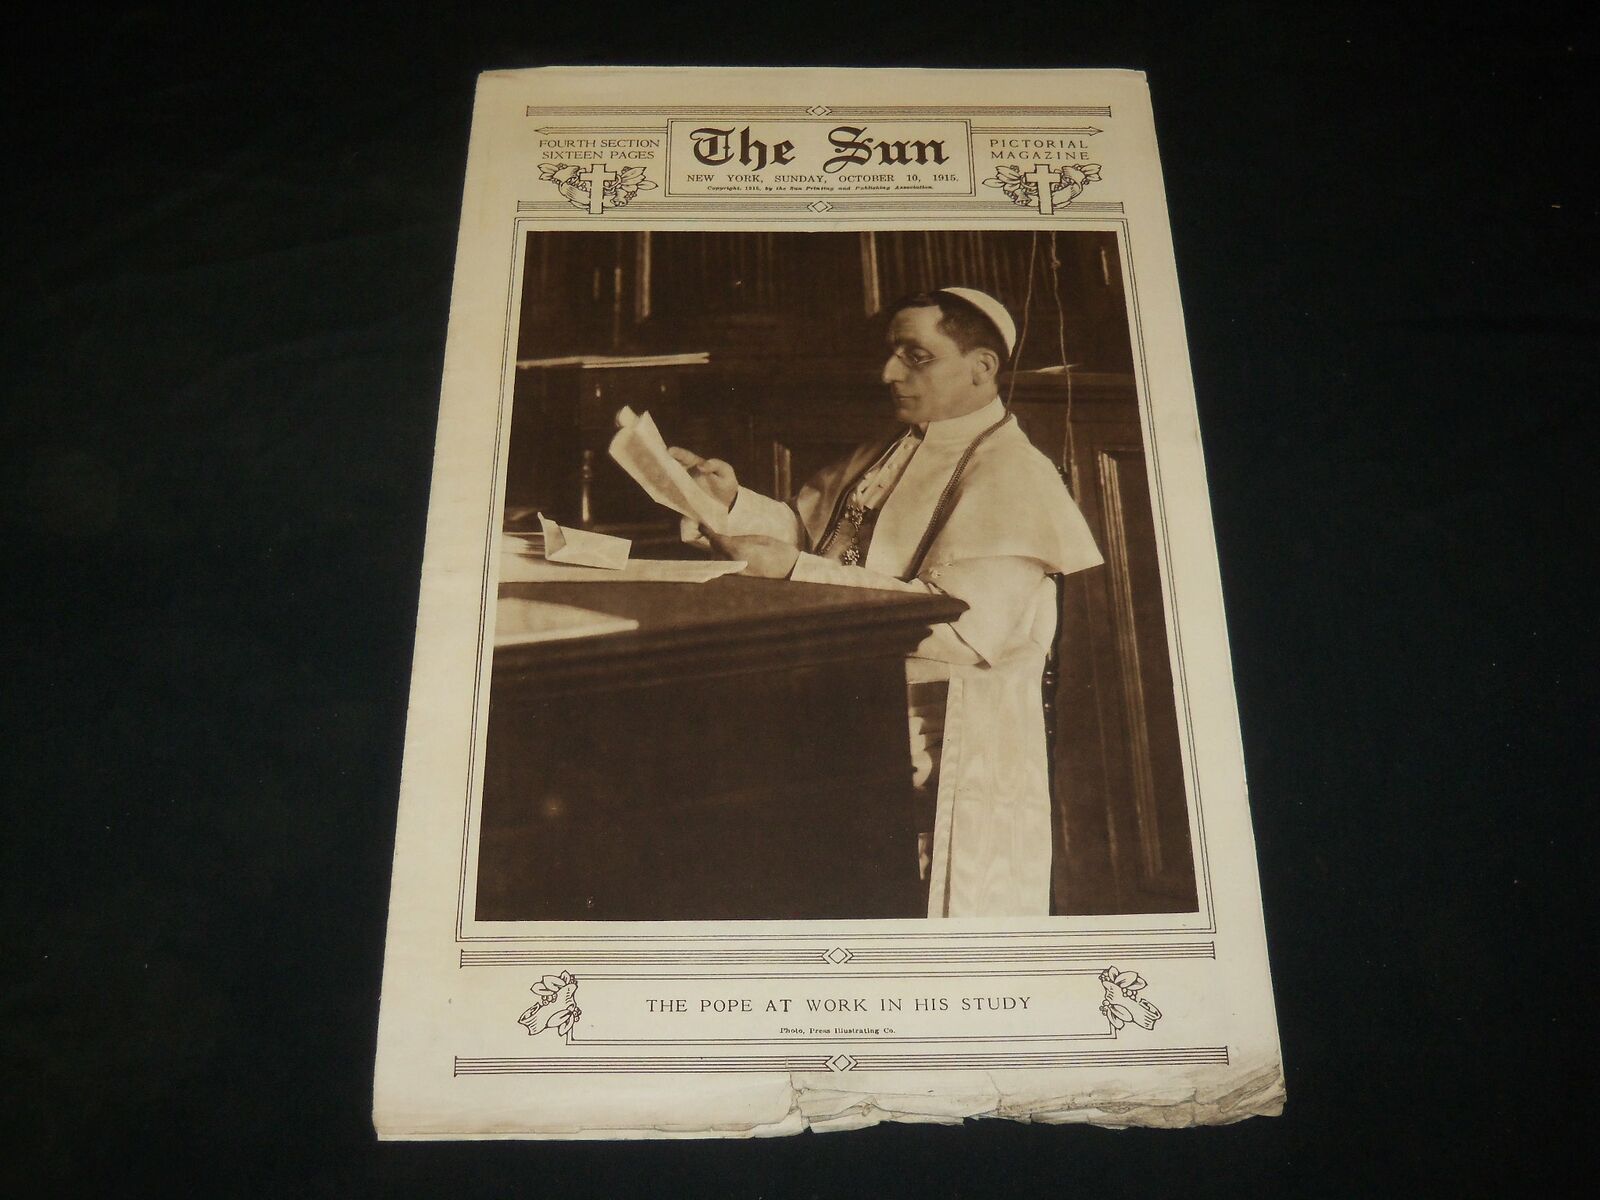 1915 OCTOBER 10 THE SUN PICTORIAL MAGAZINE SECTION - THE POPE - NP 5422